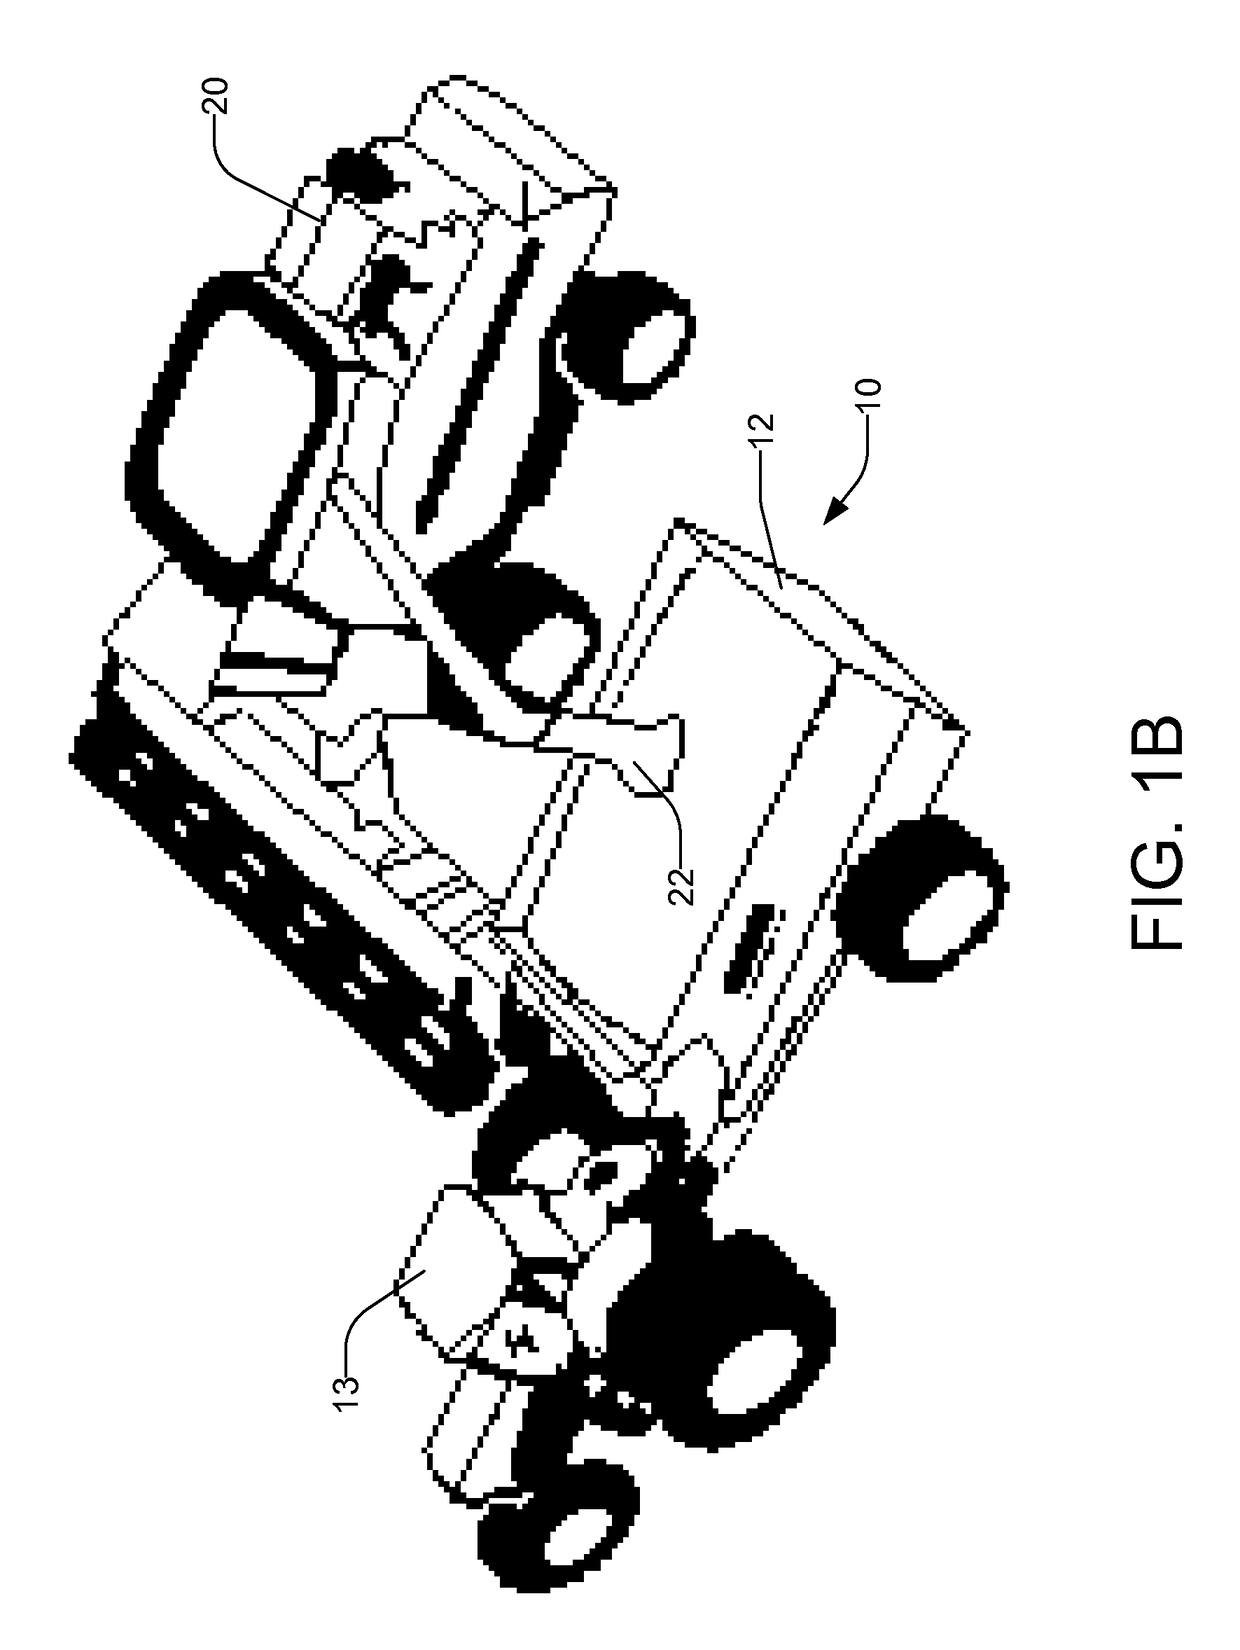 System and method for measuring grain cart weight